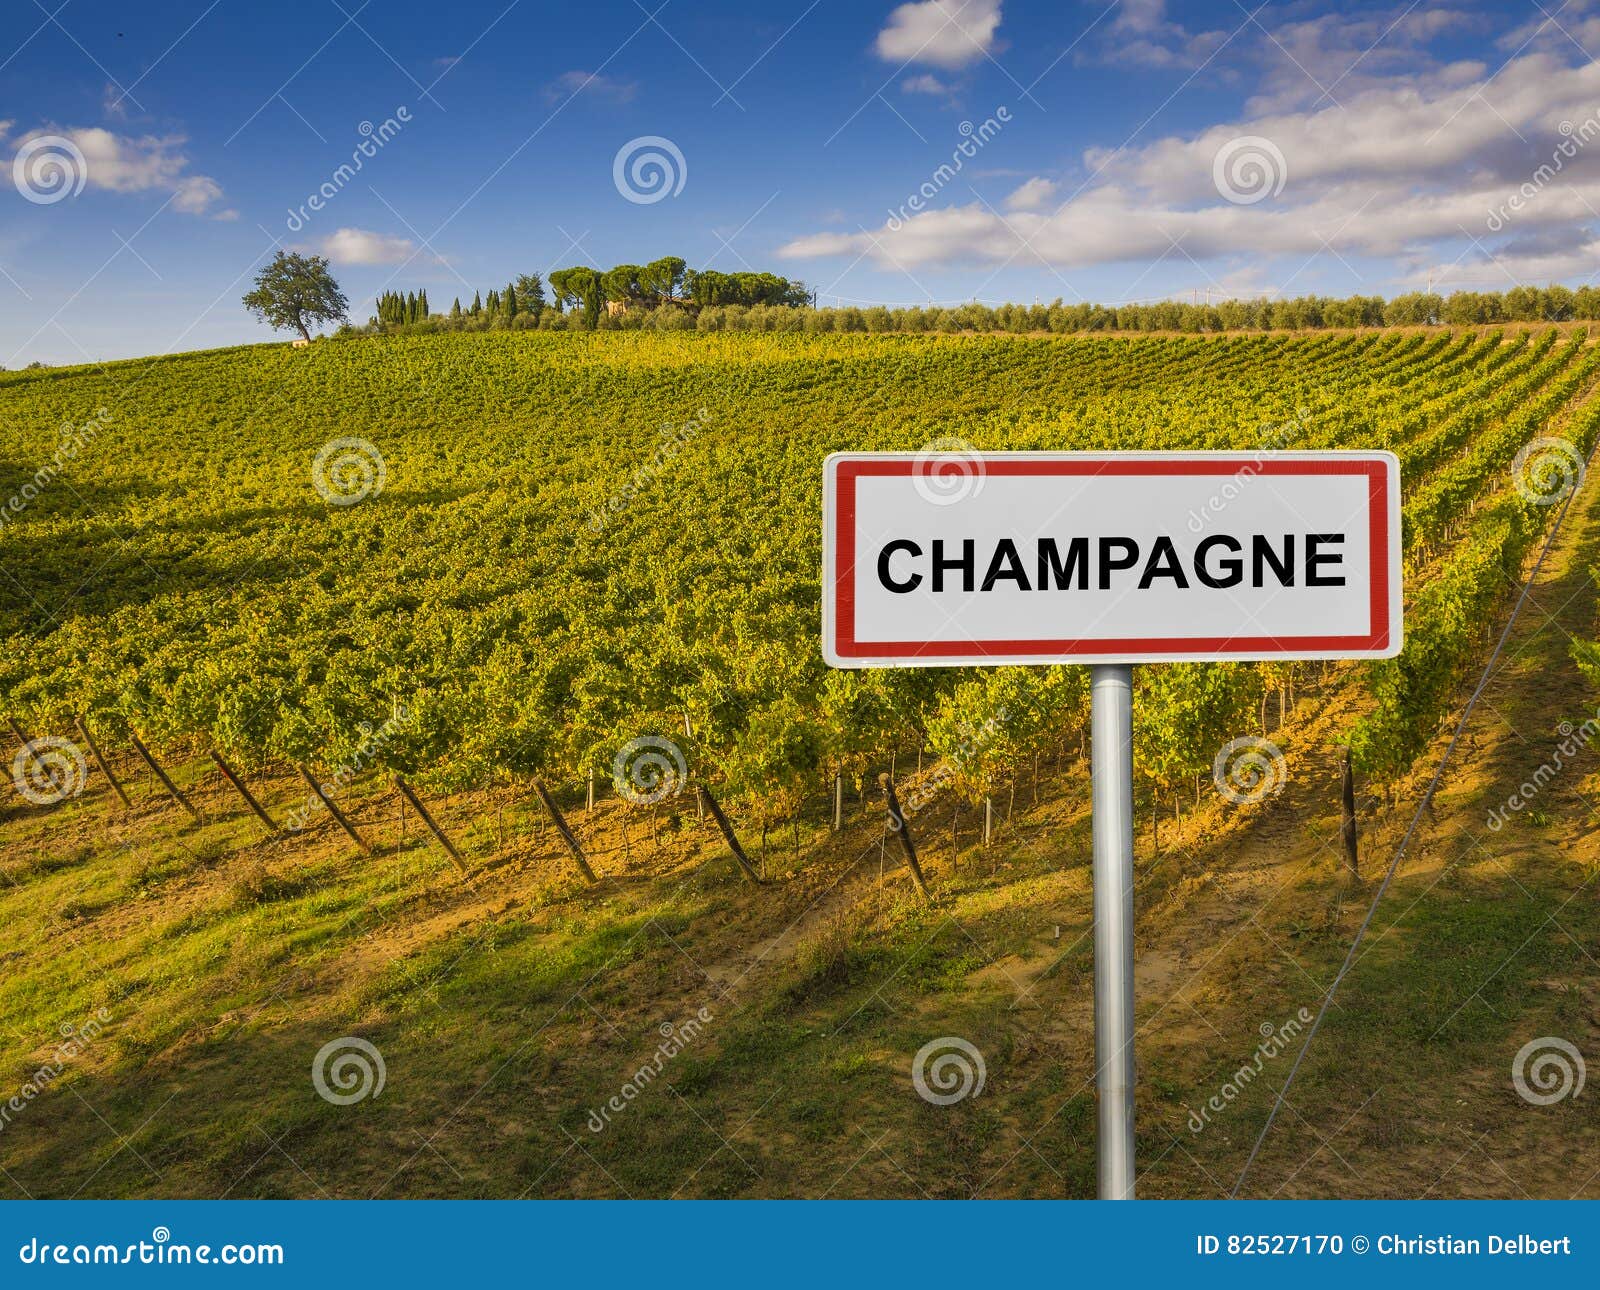 champagne wine region of france